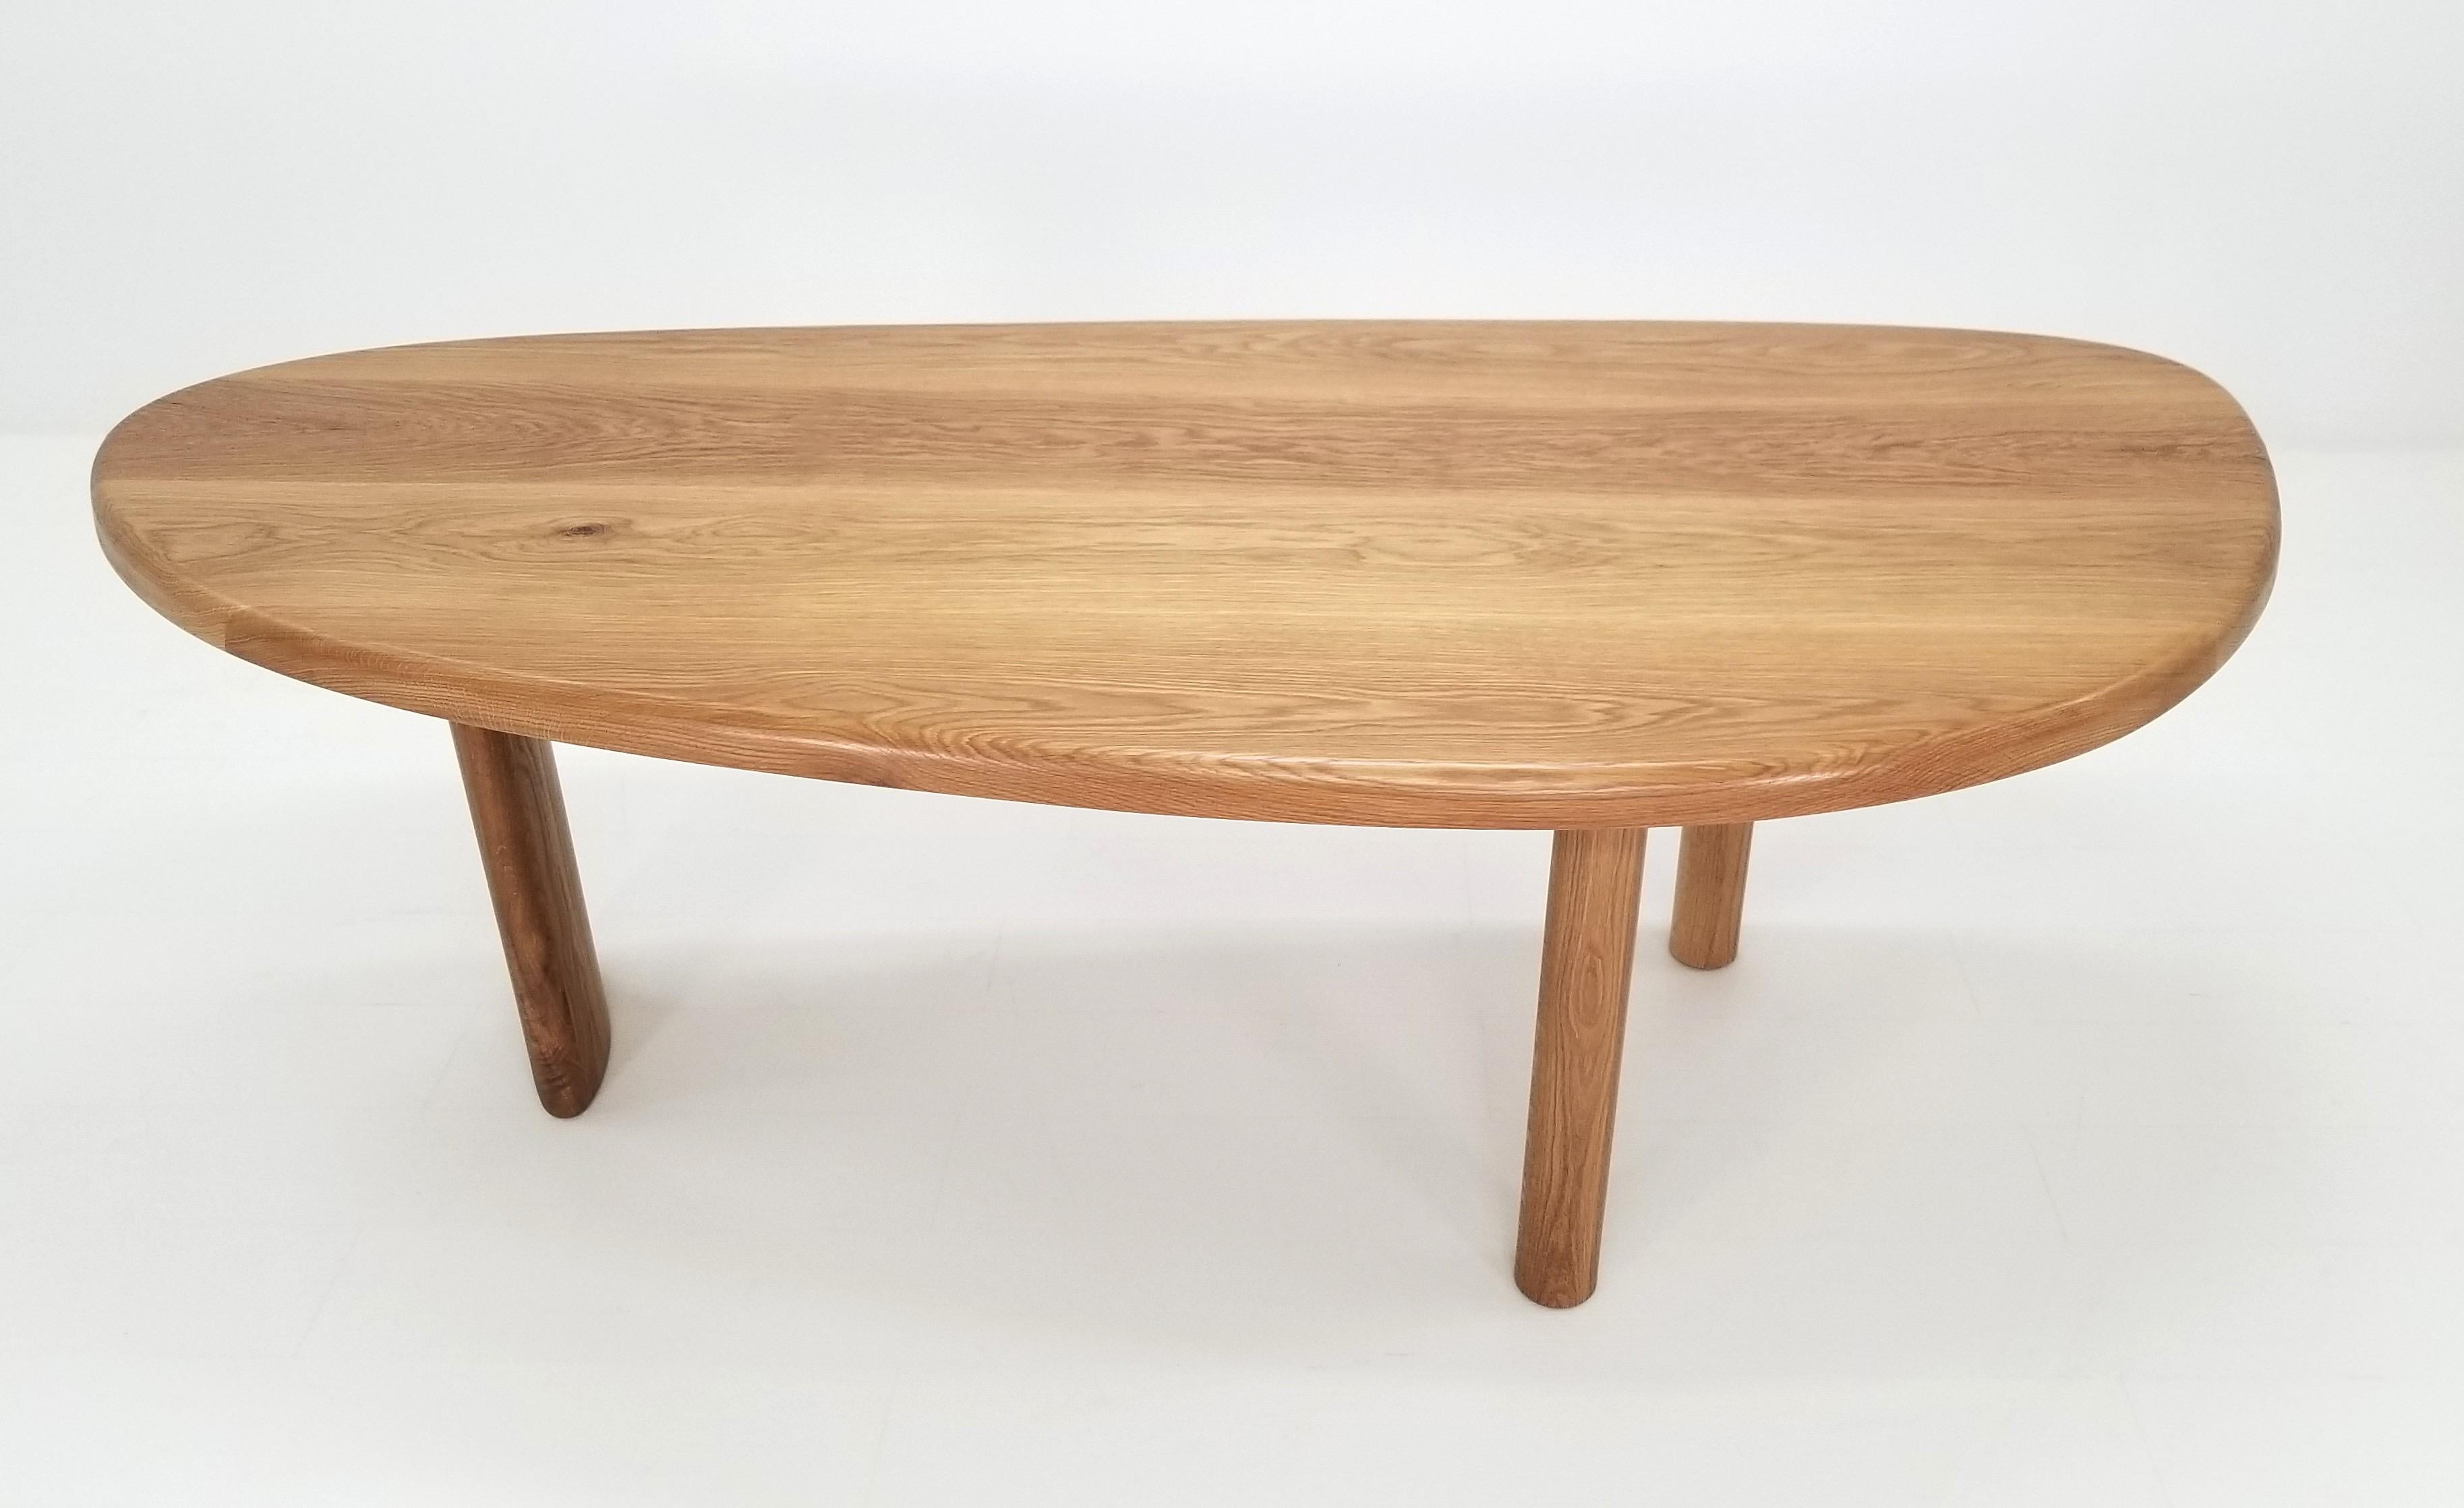 Inspired by Charlotte Perriand's Free Form Dining Table, this table is made with premium hardwood. The hard-wax oil finish adds a golden tone to the white oak. This design features an organic-shaped, two-inch thick table top and solid white oak